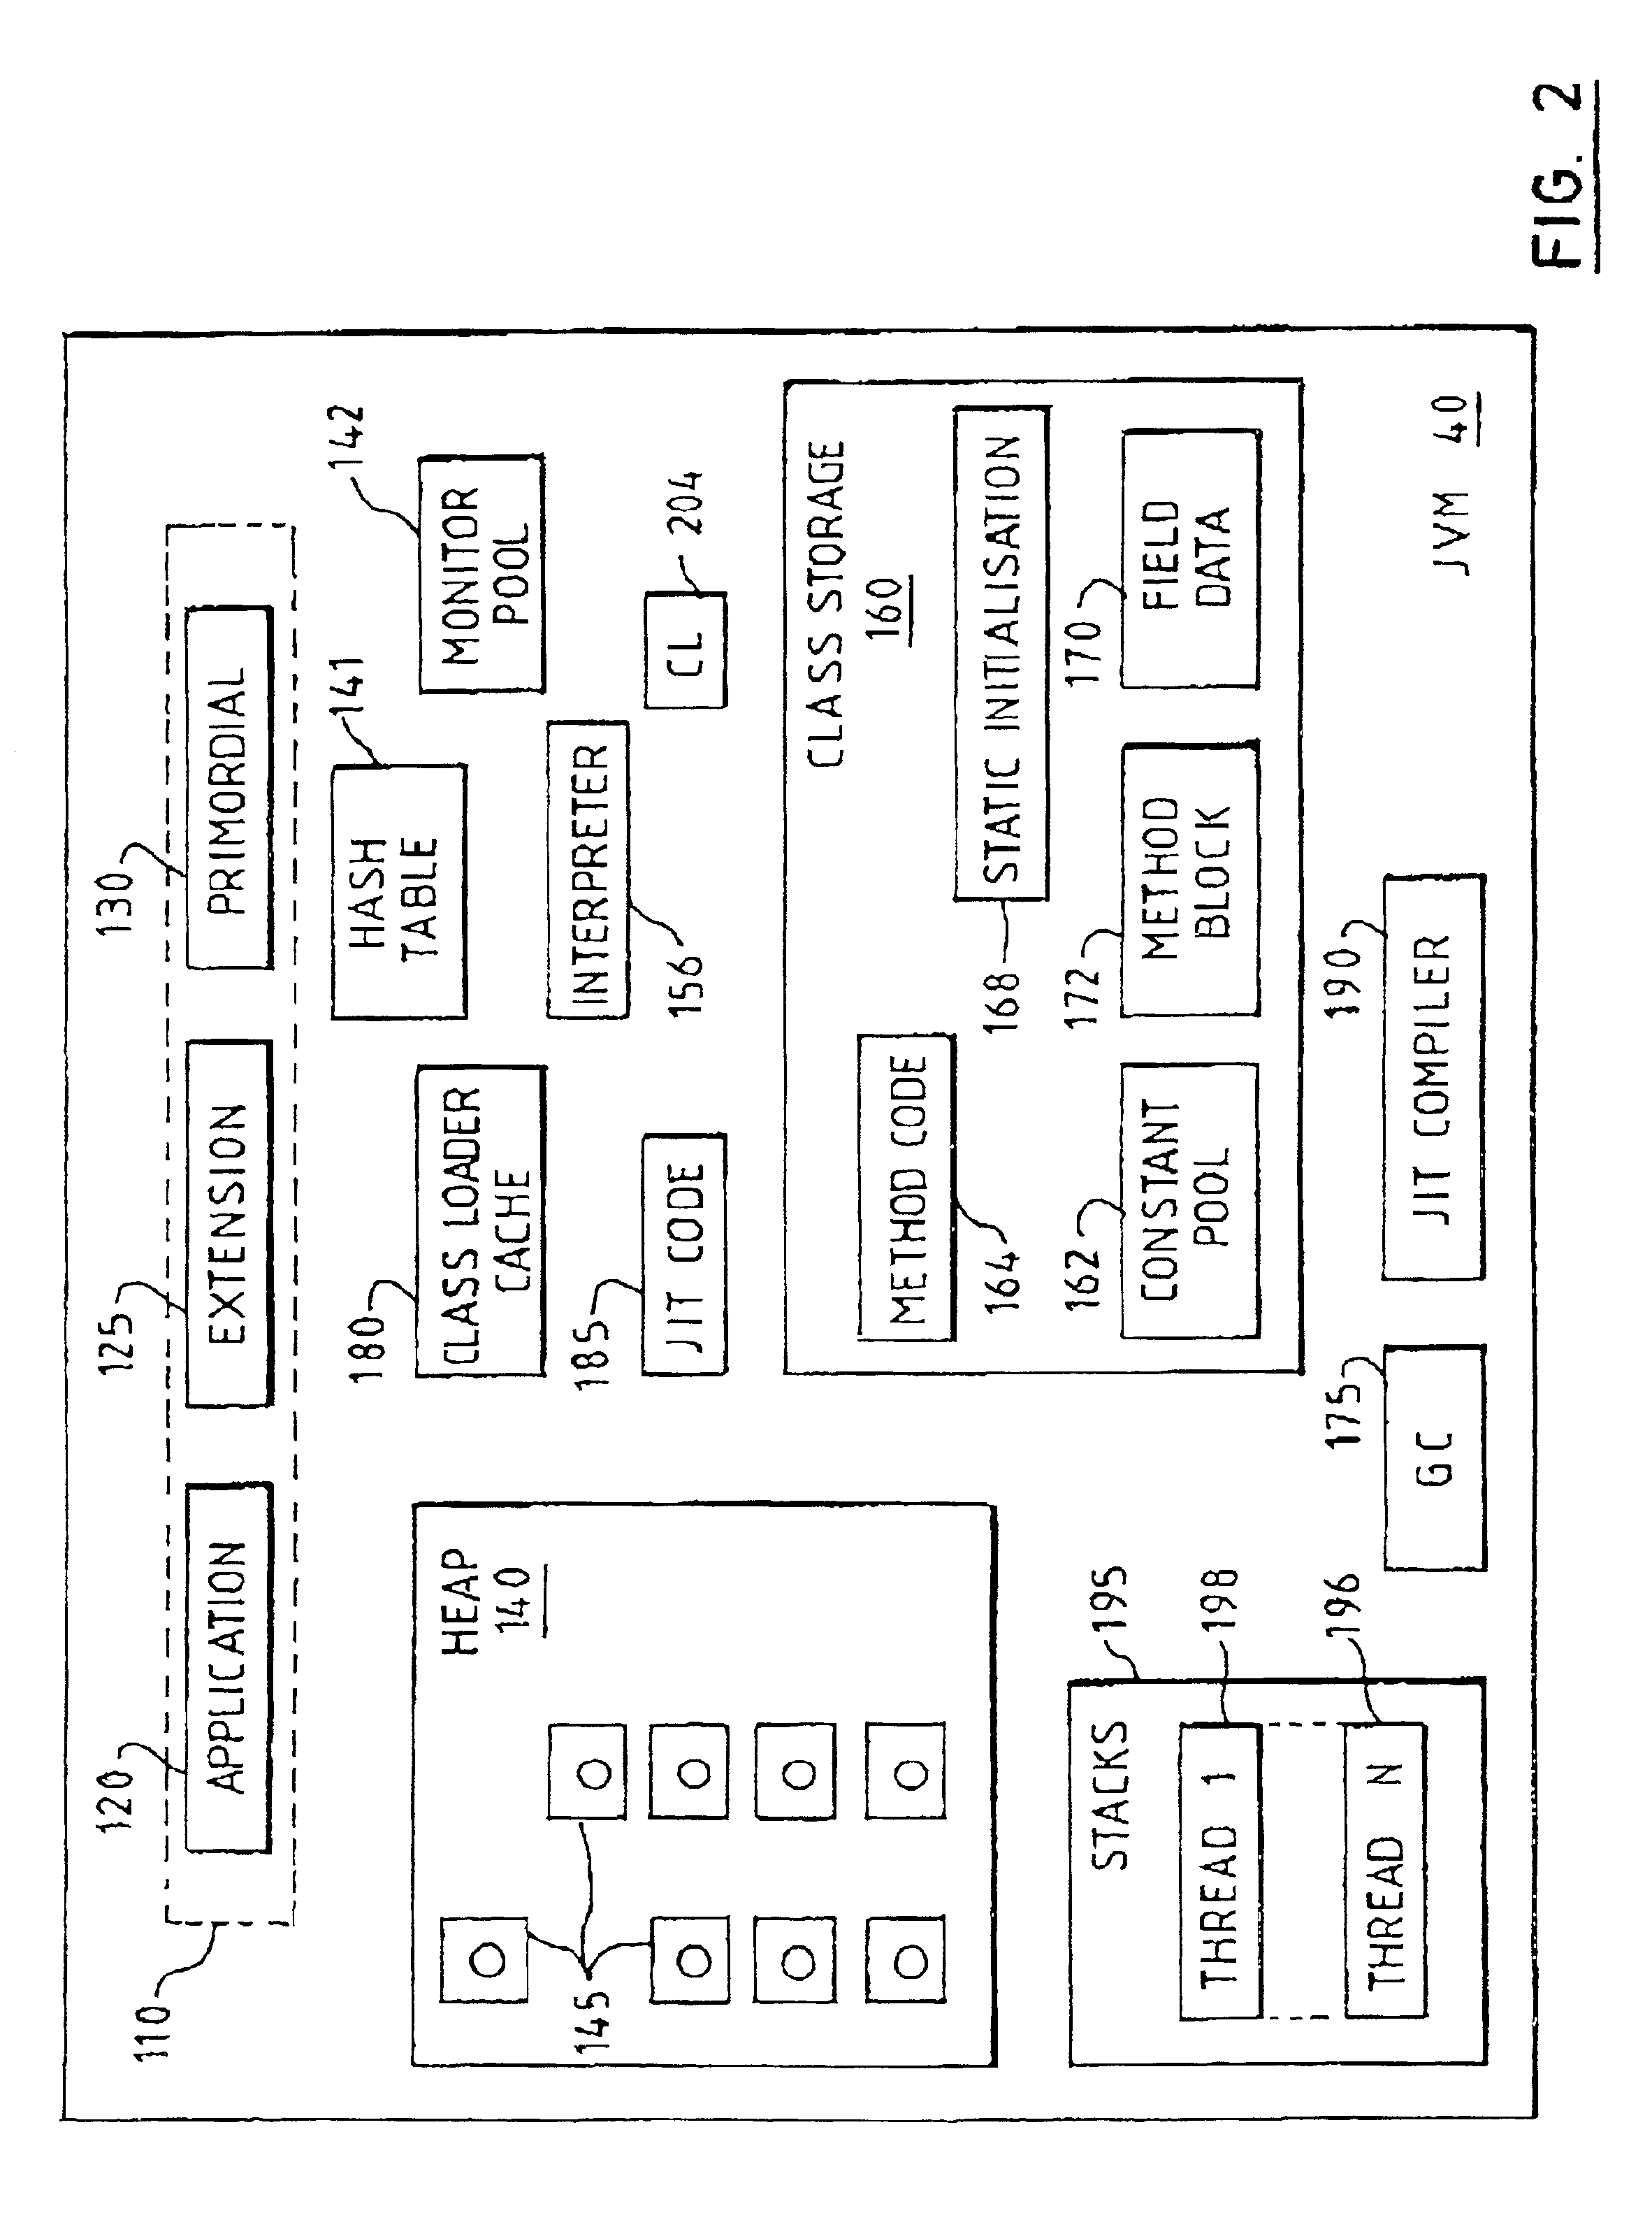 Computer system and method for constant pool operations